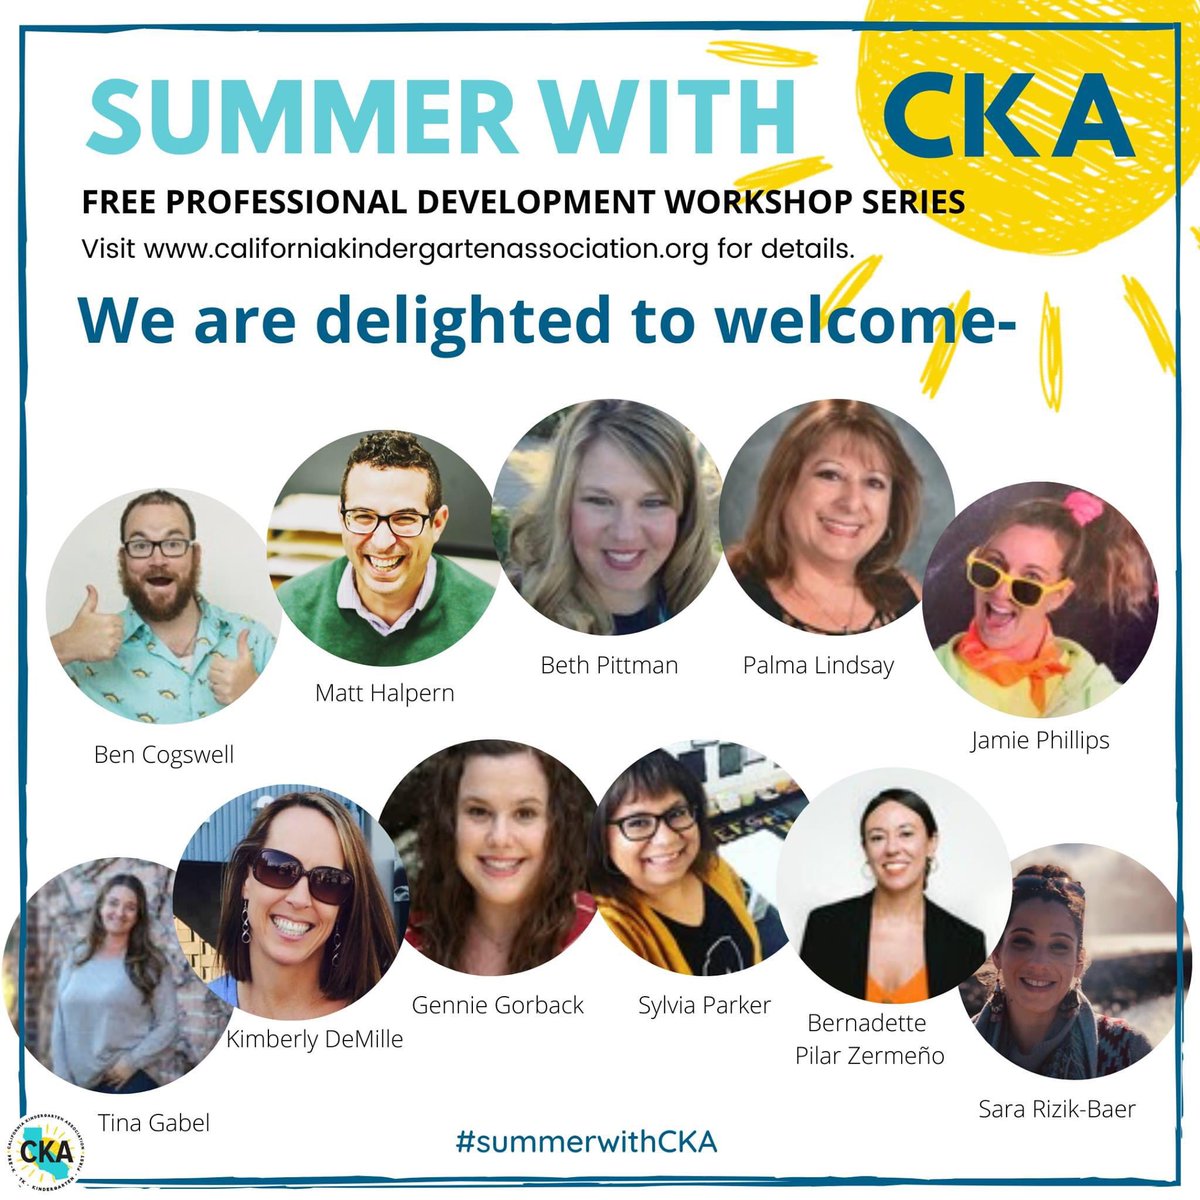 Checkout the 💥FREE 💥@CKAstaff Professional Development ☀️Summer Series! Click on the link for more info on each session! #summerwithCKA #PDW #professionaldevelopment
californiakindergartenassociation.org/professional-d…

#wearecue #mbcue #k2cantoo #seesawchat #alisalatrong